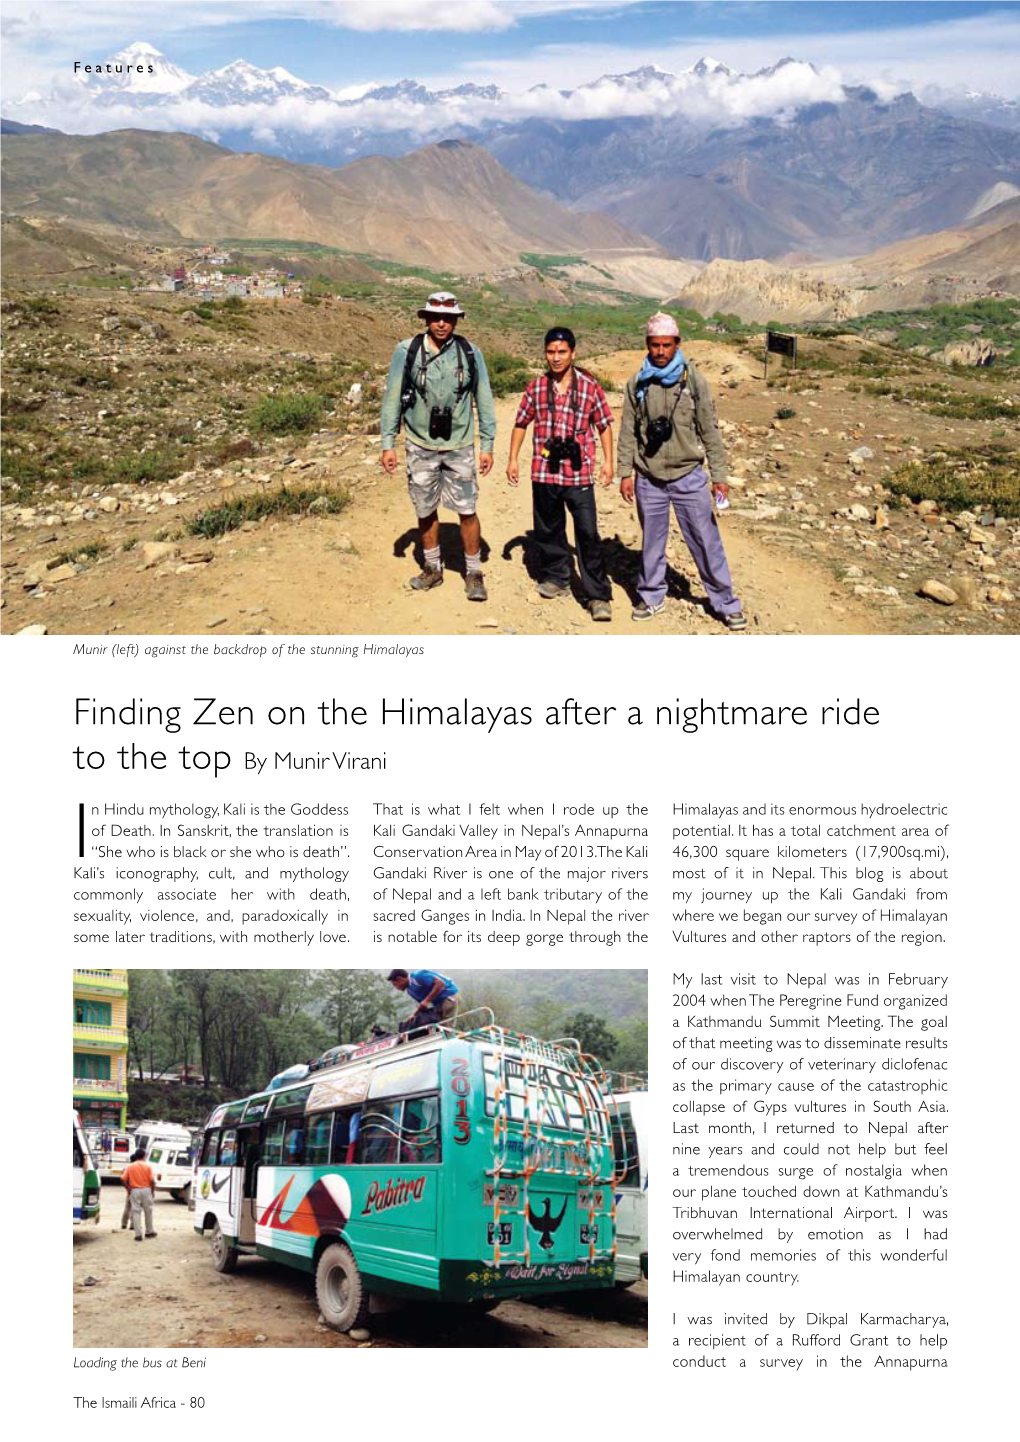 Finding Zen on the Himalayas After a Nightmare Ride to the Top by Munir Virani